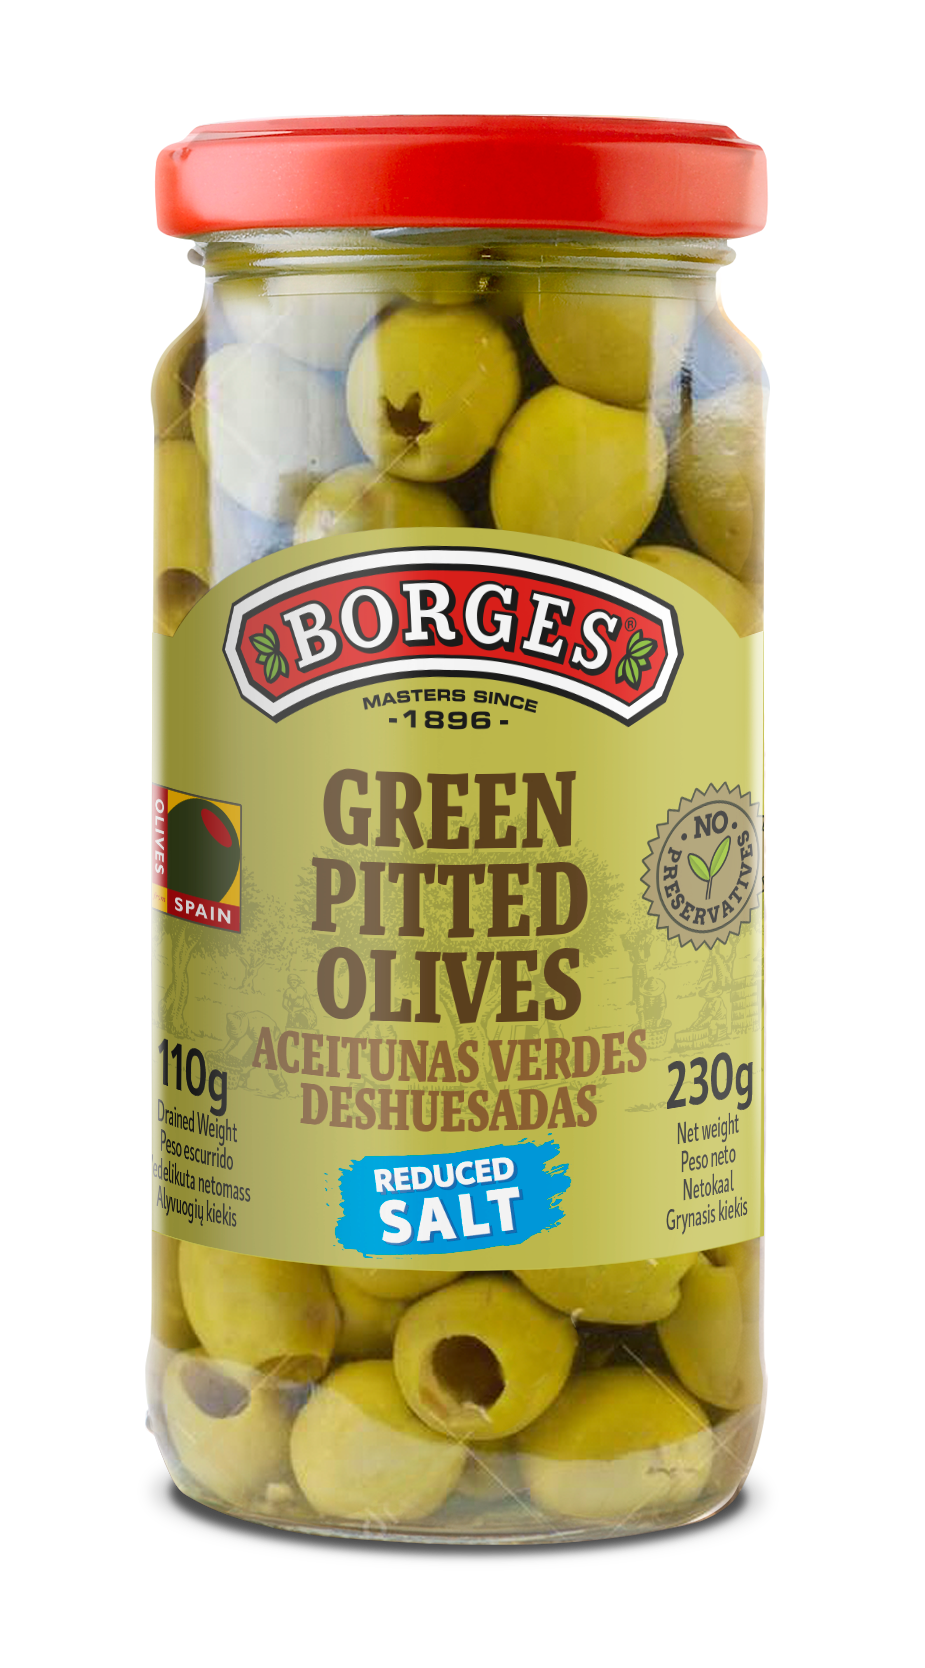 BORGES GREEN PITTED OLIVES